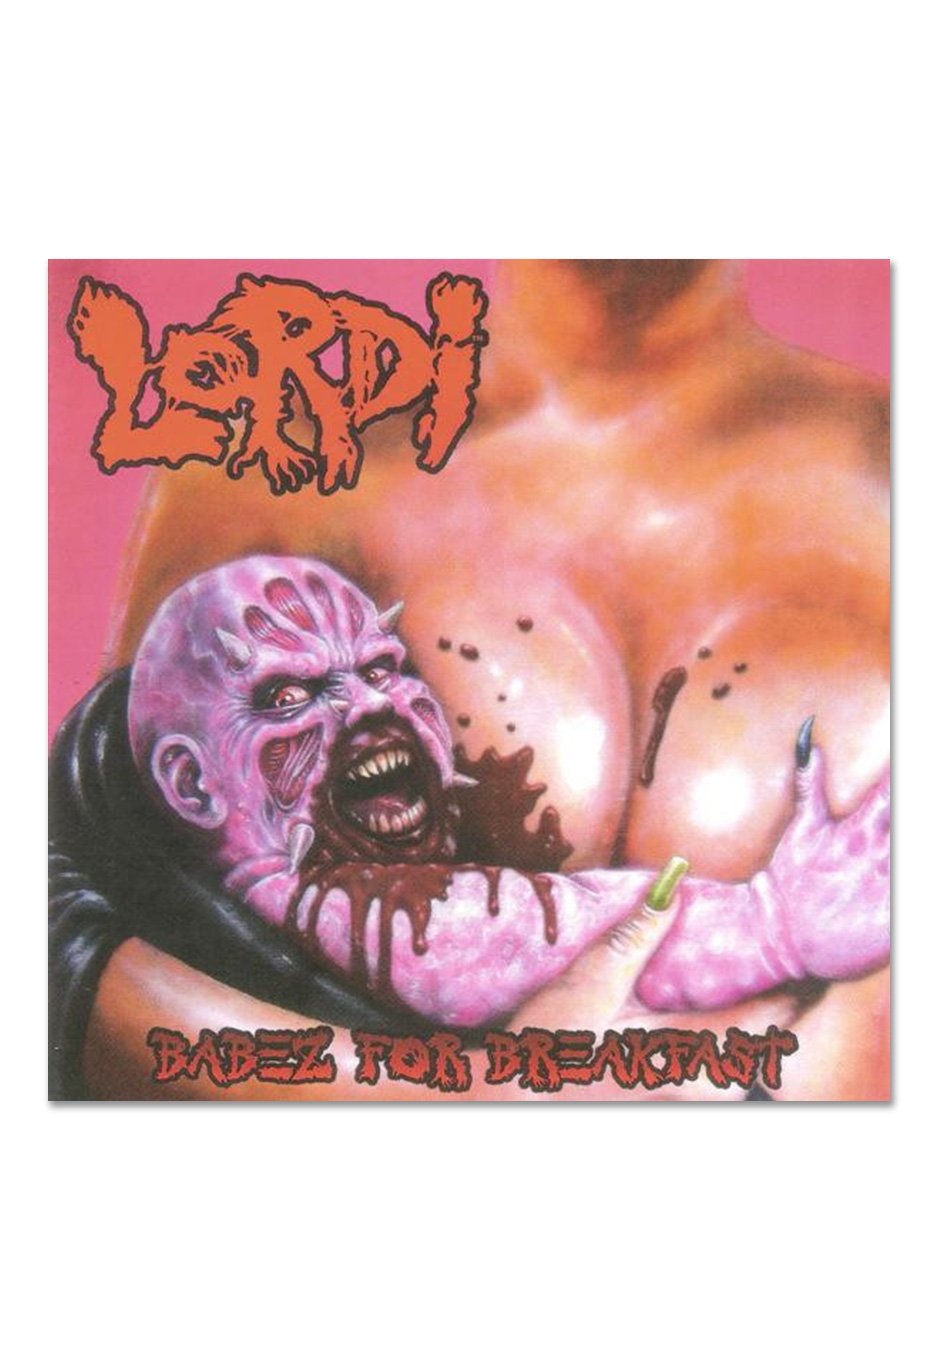 Lordi - Babez For Breakfast Ltd. Red - Colored Vinyl